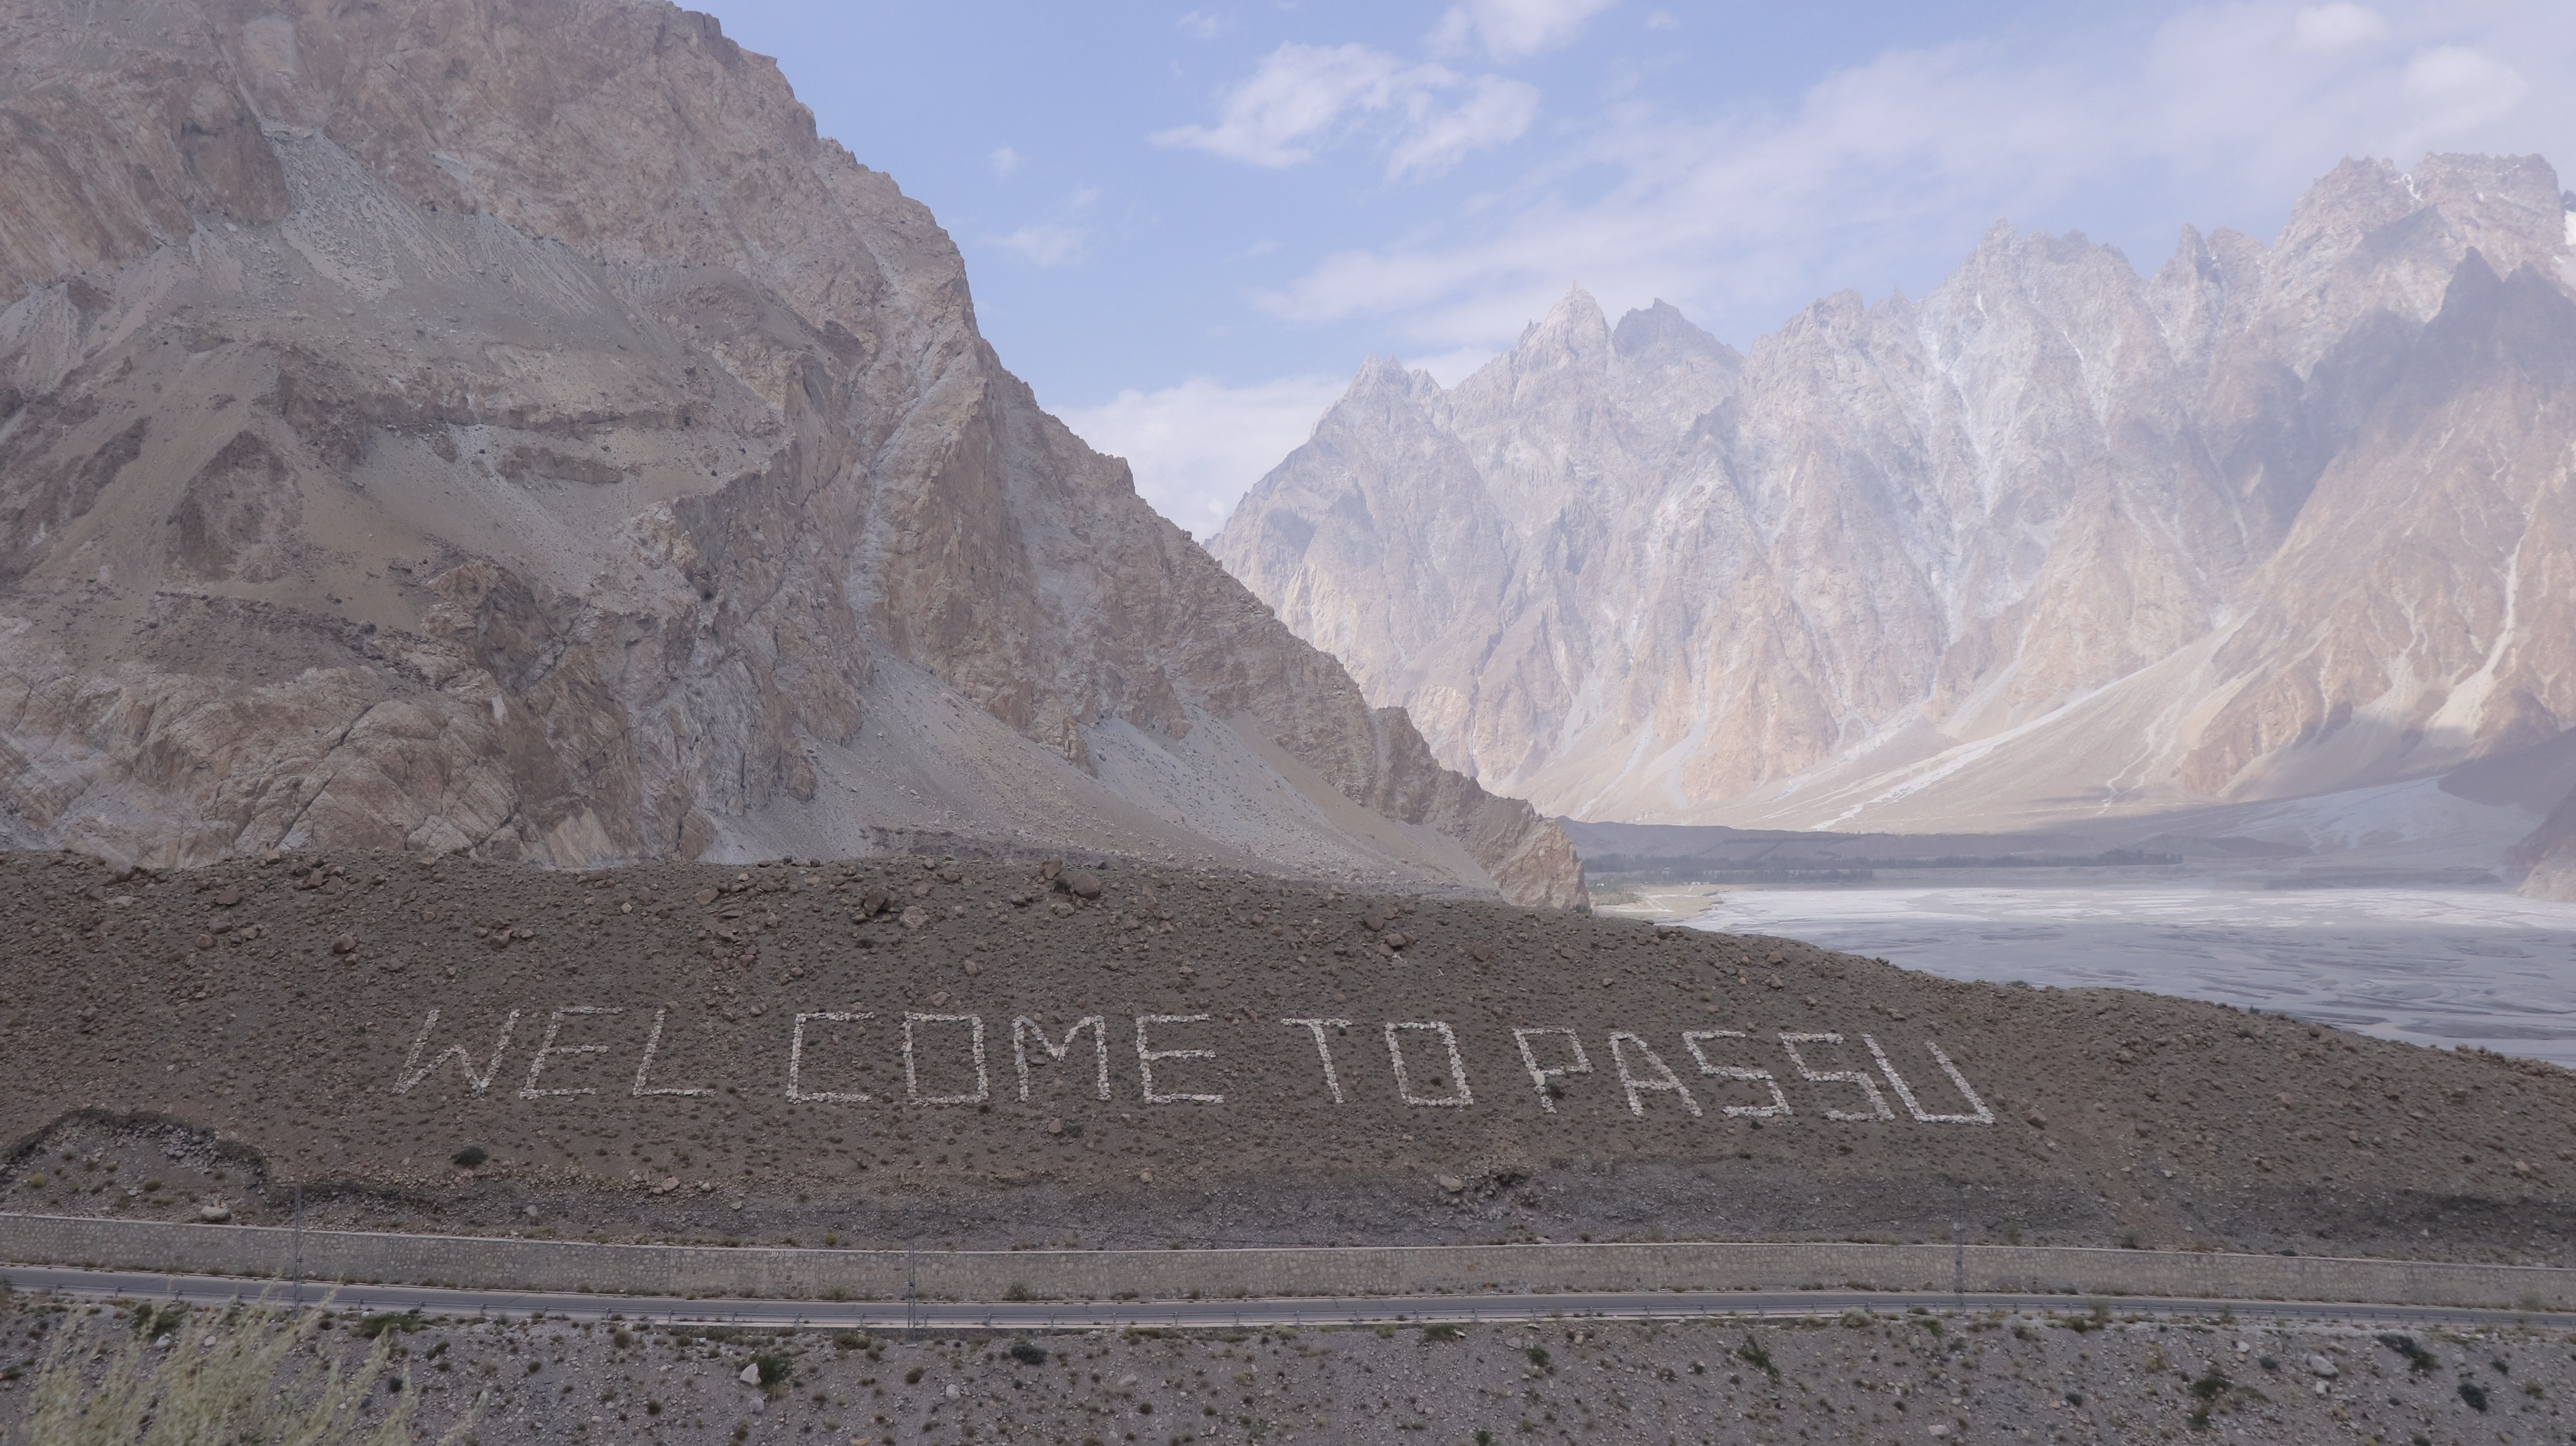 The entry point of passu peak in Hunza with white skinned mountains